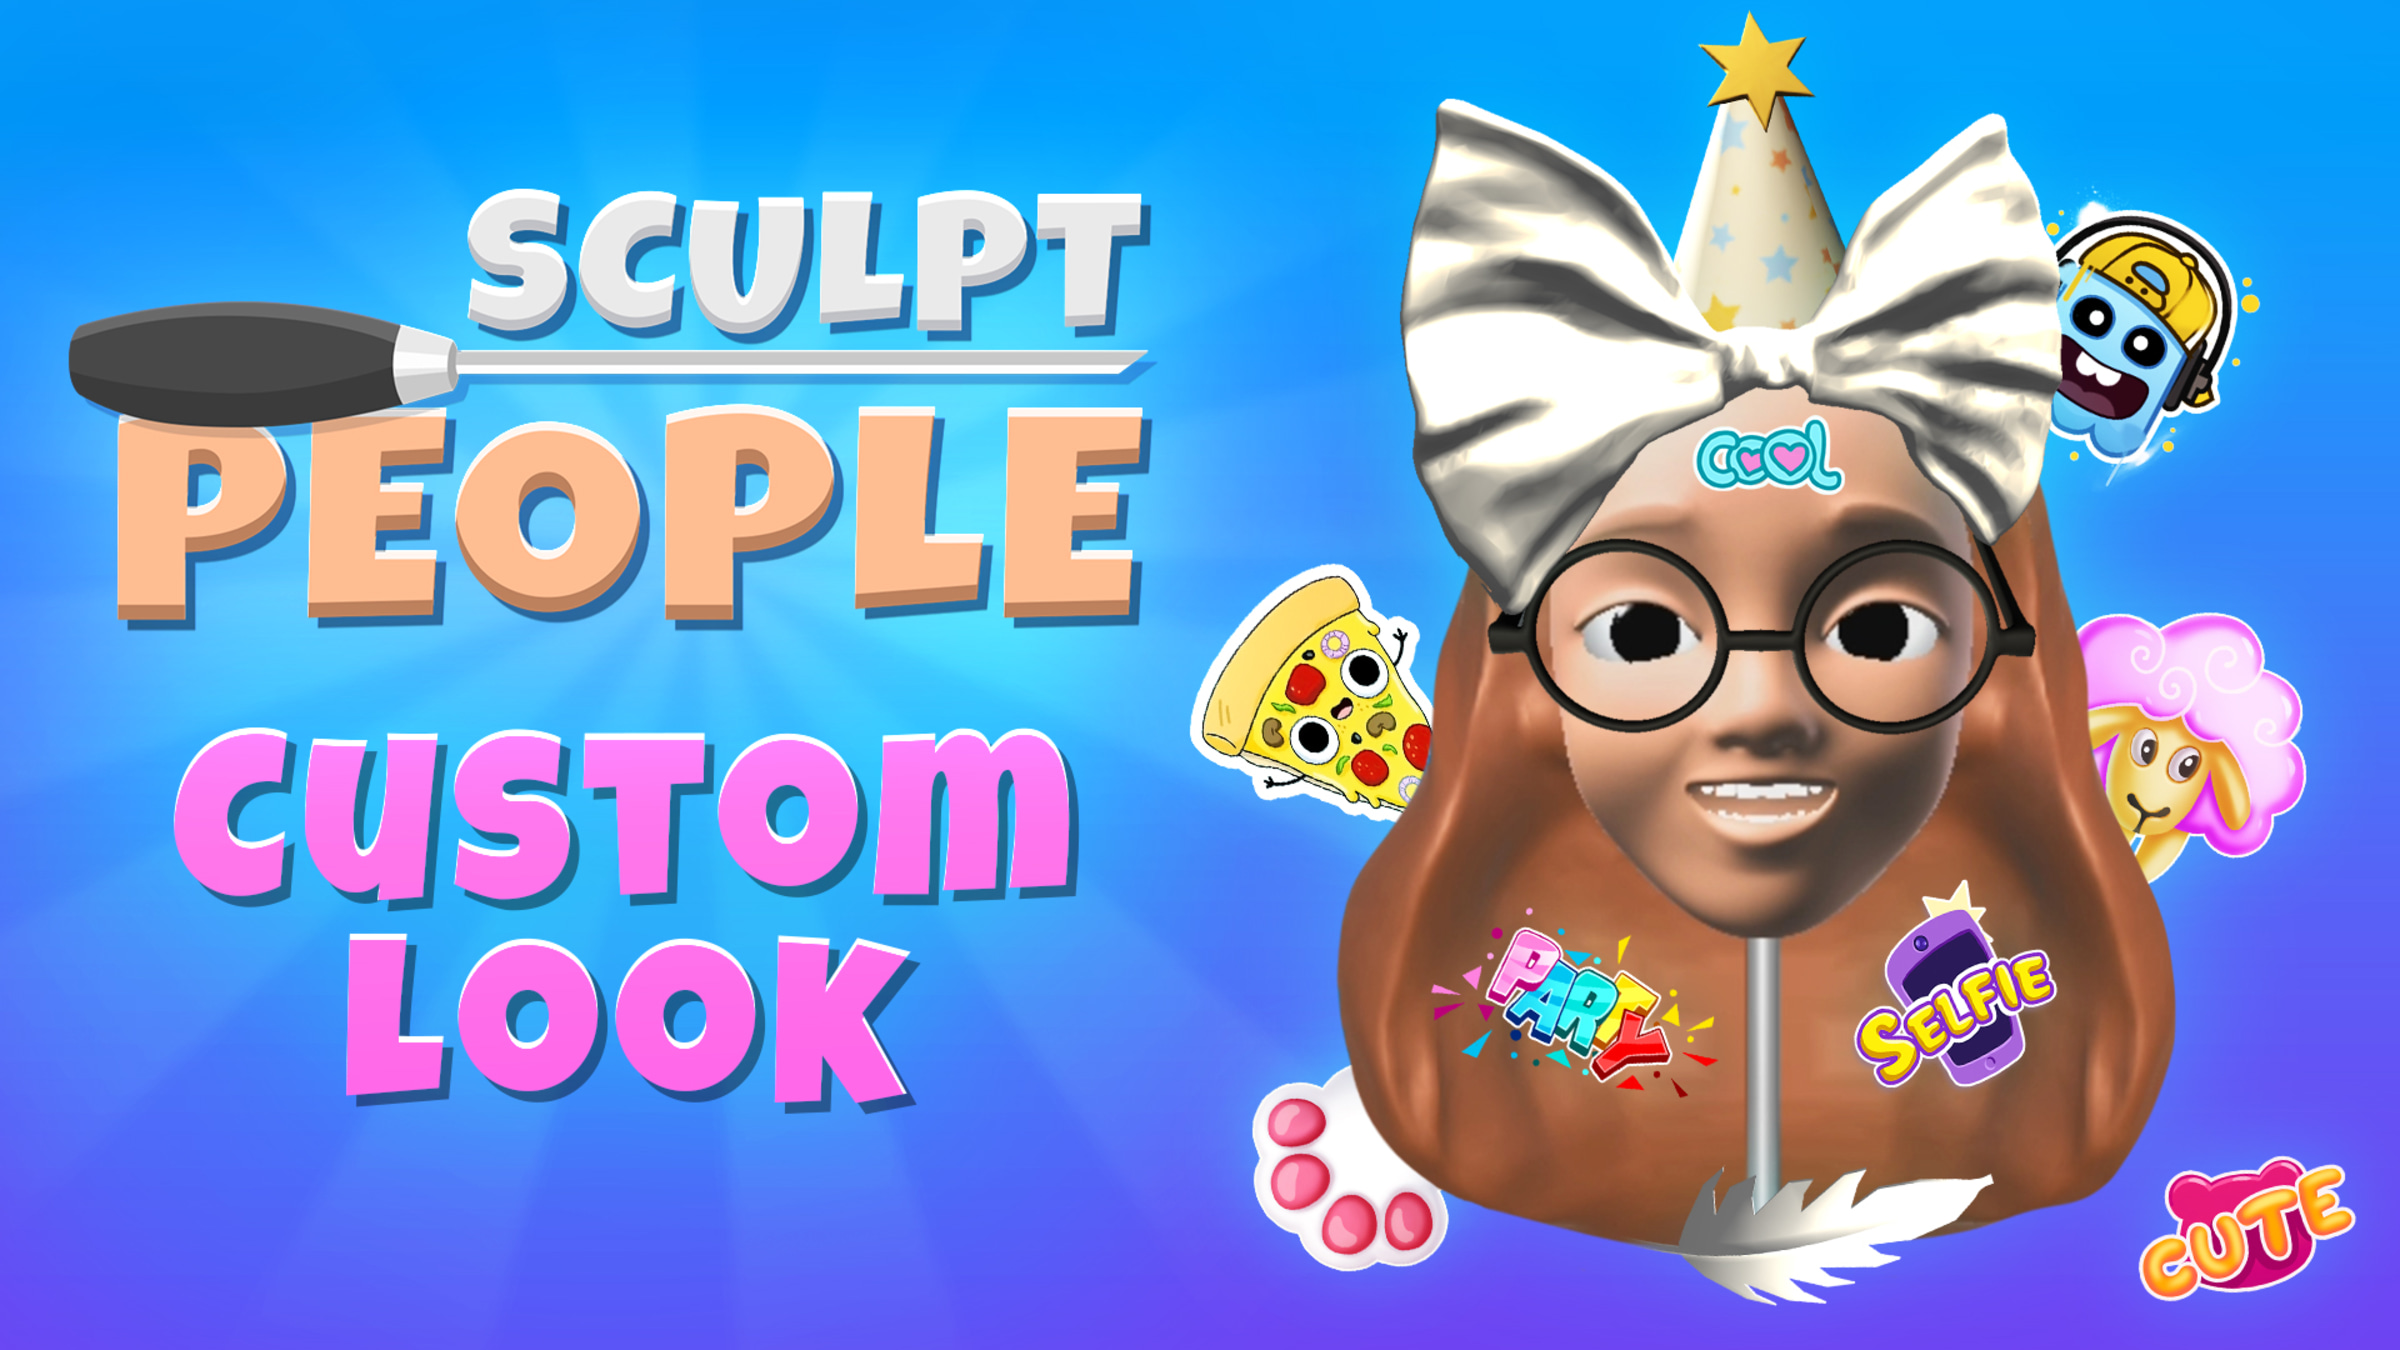 Sculpt People: Complete Edition for Nintendo Switch - Nintendo Official Site